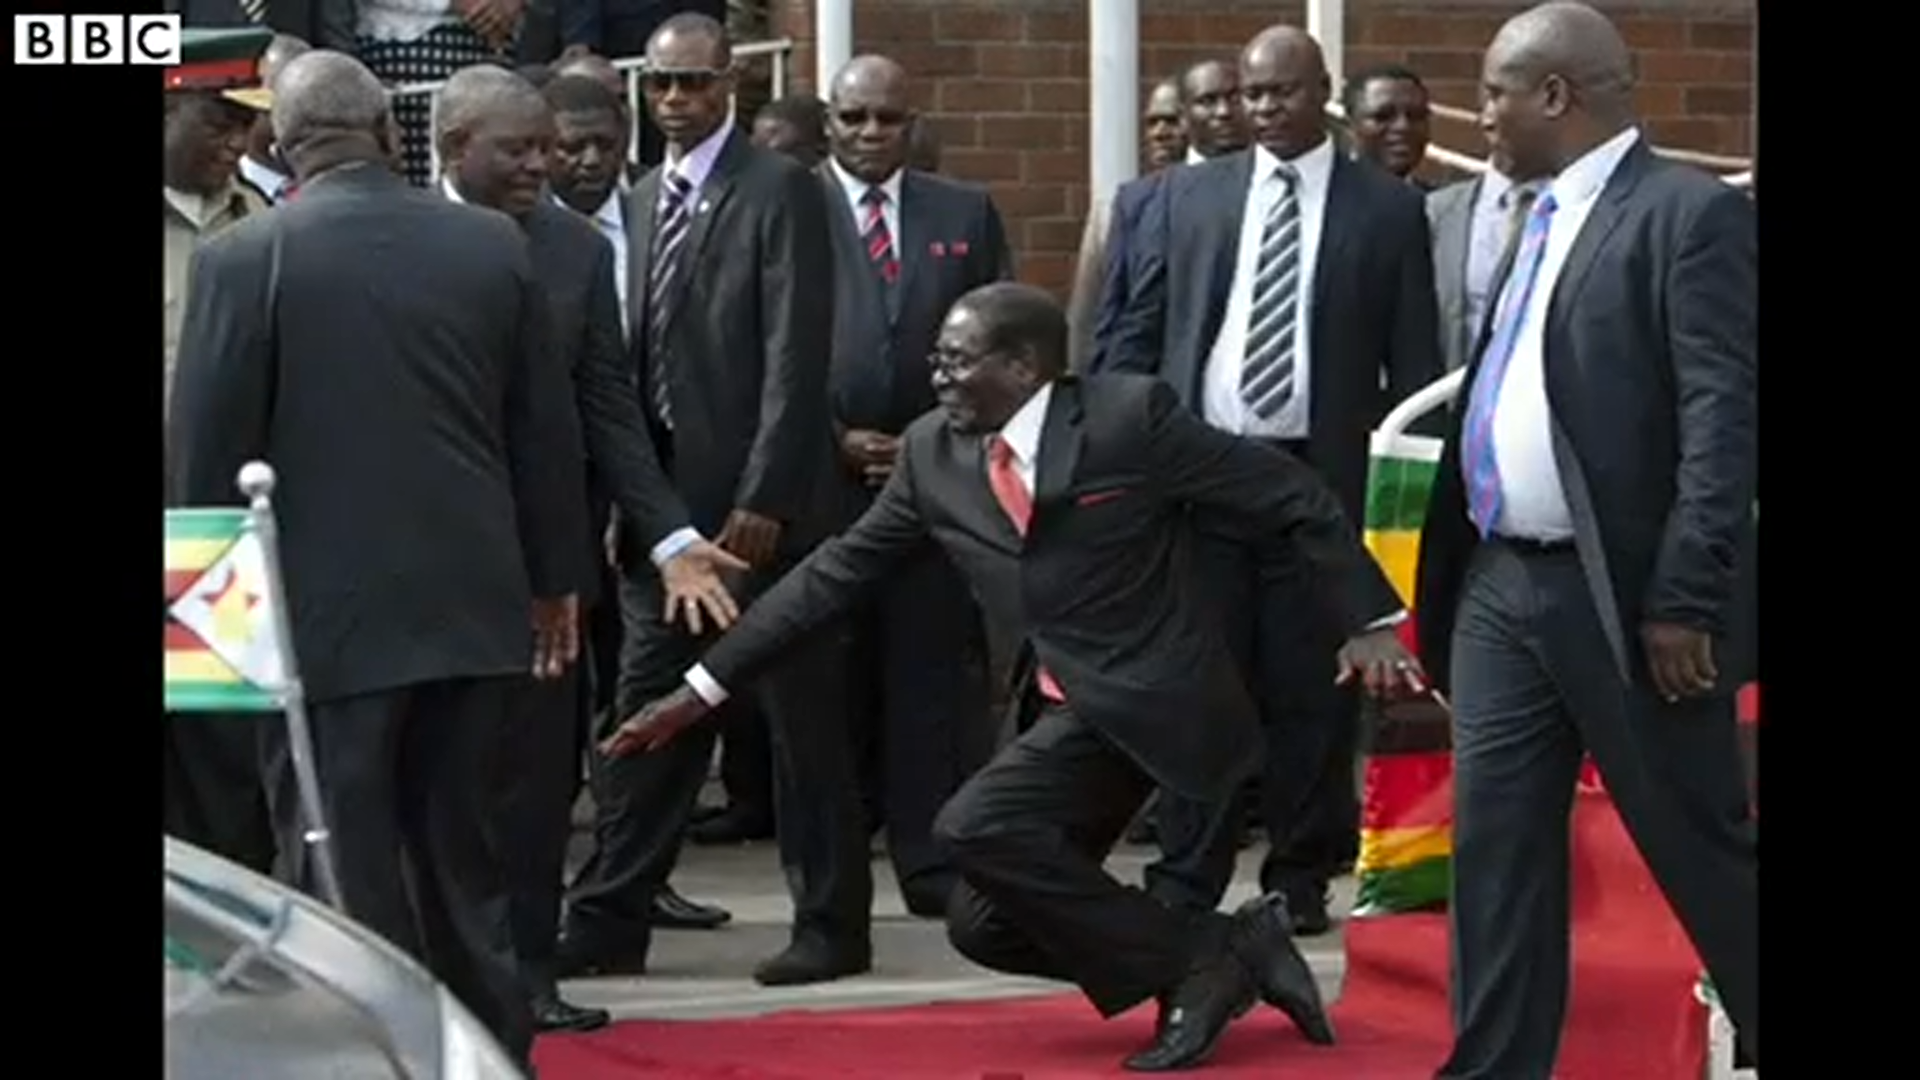 Robert Mugabe wants this picture deleted today